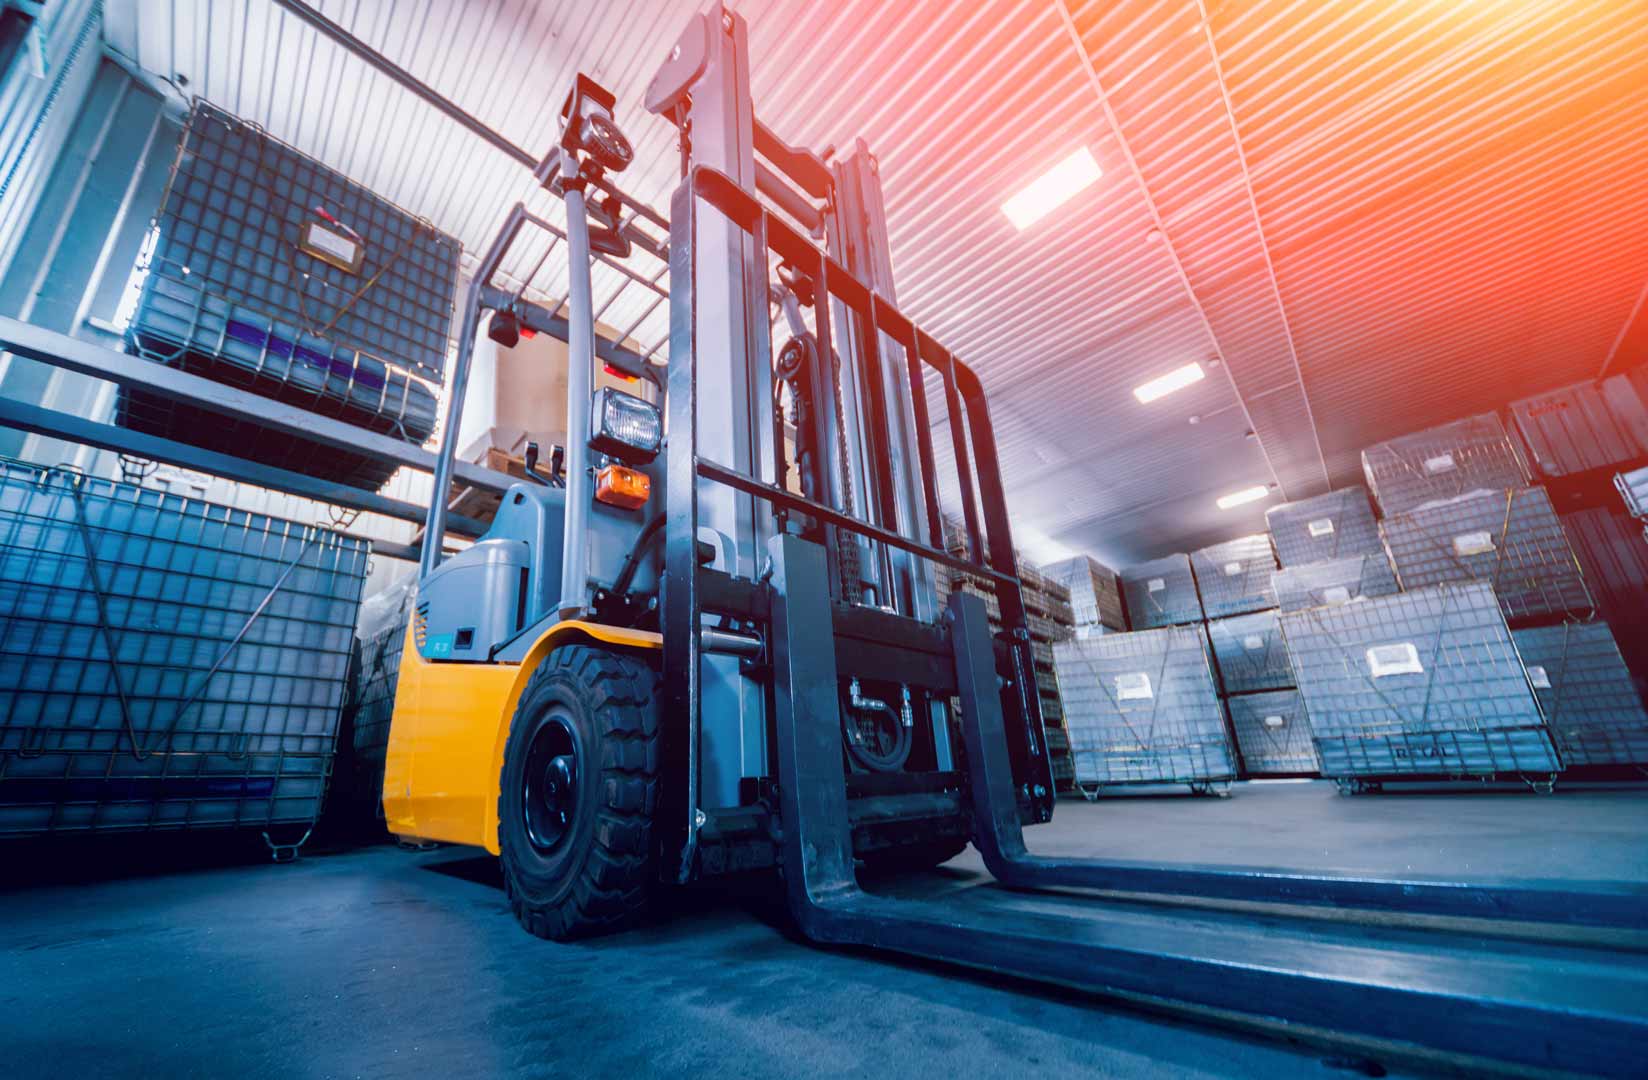 What You Should Know Before Renting a Forklift